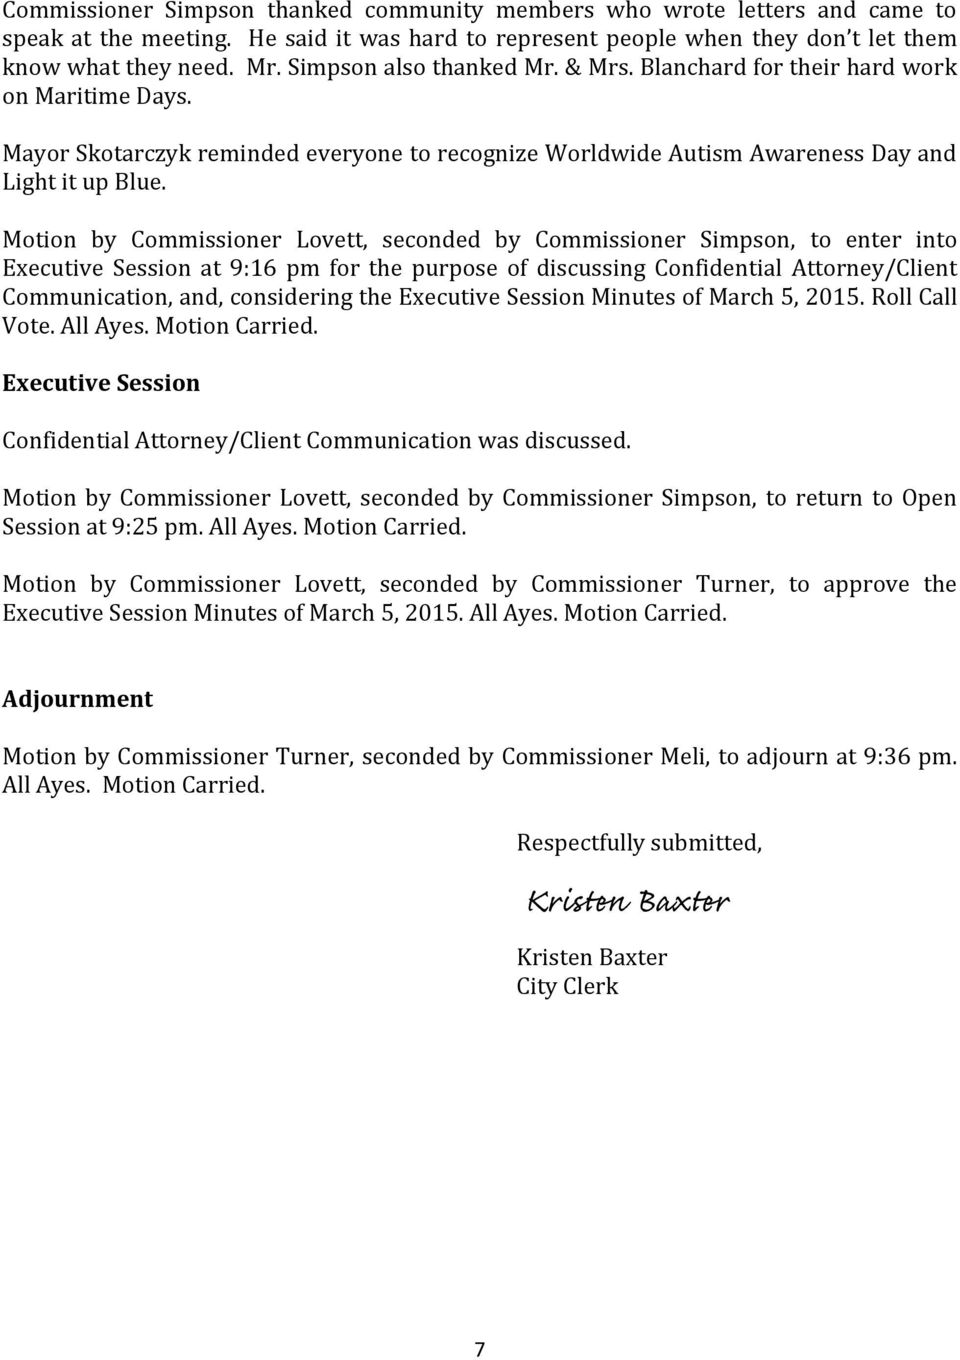 Motion by Commissioner Lovett, seconded by Commissioner Simpson, to enter into Executive Session at 9:16 pm for the purpose of discussing Confidential Attorney/Client Communication, and, considering